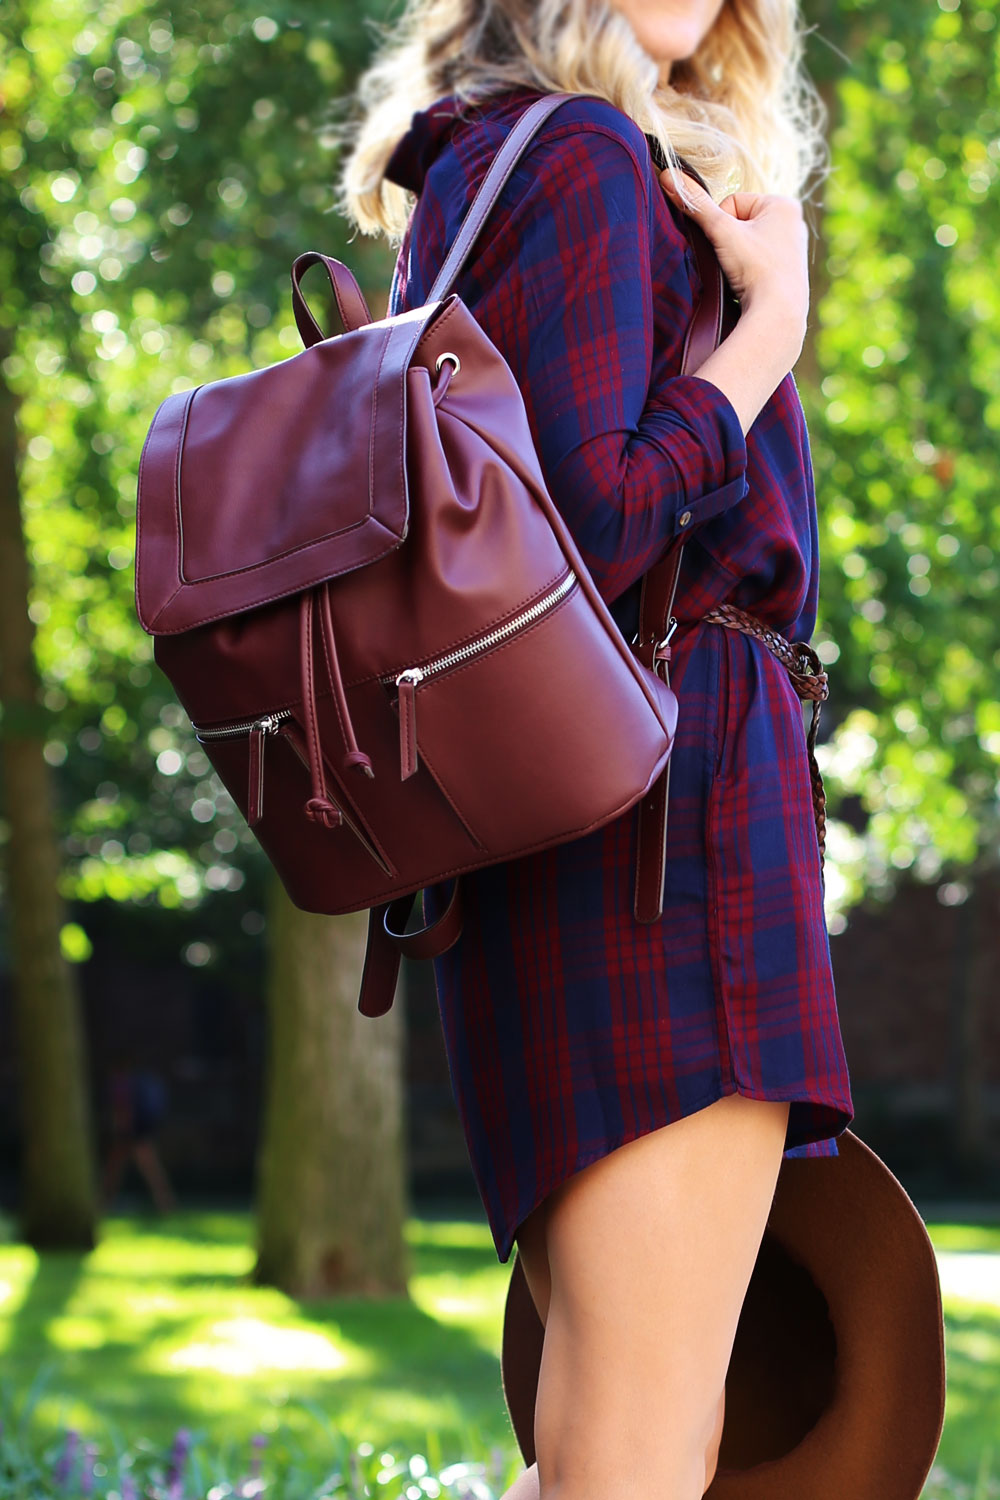 Leather backpack in burgundy